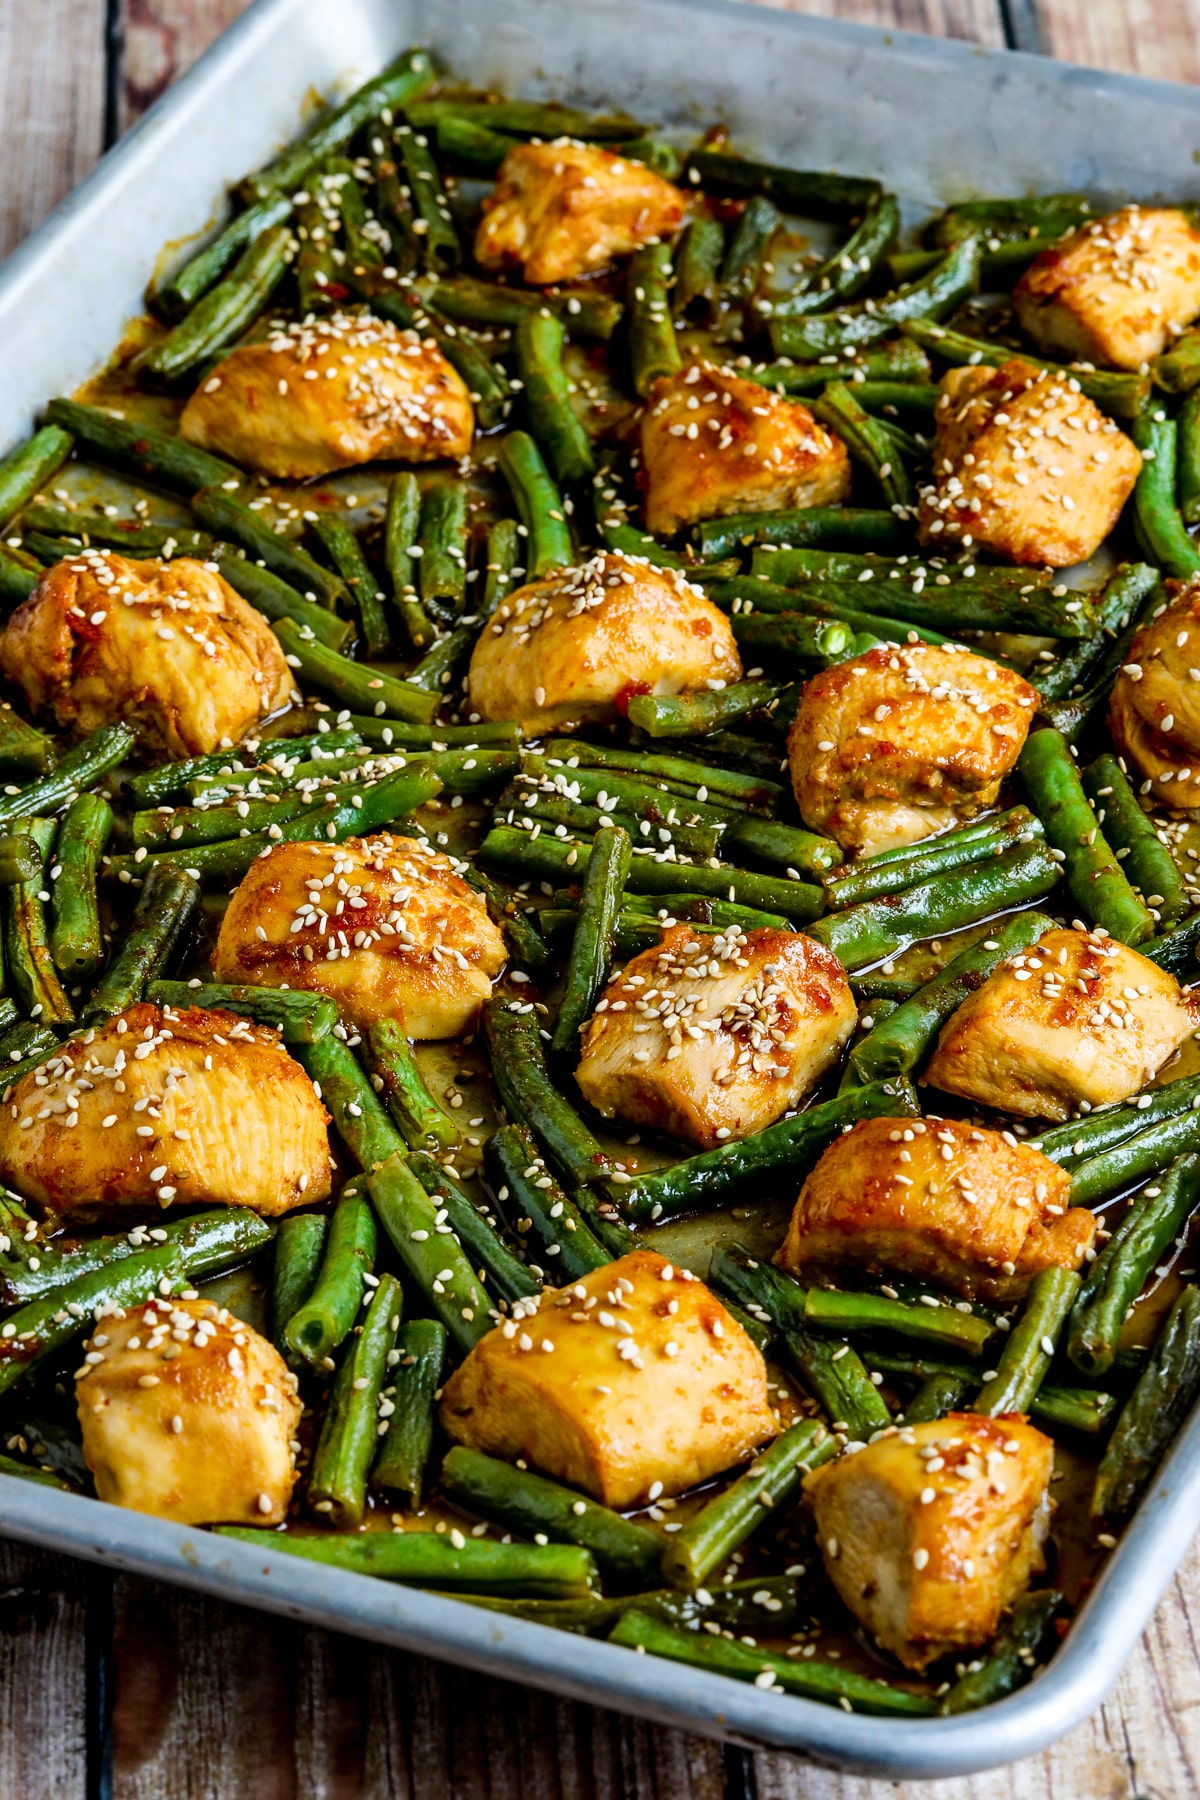 Asian Chicken and Green Beans Sheet Pan Meal shown on sheet pan with sesame seeds.